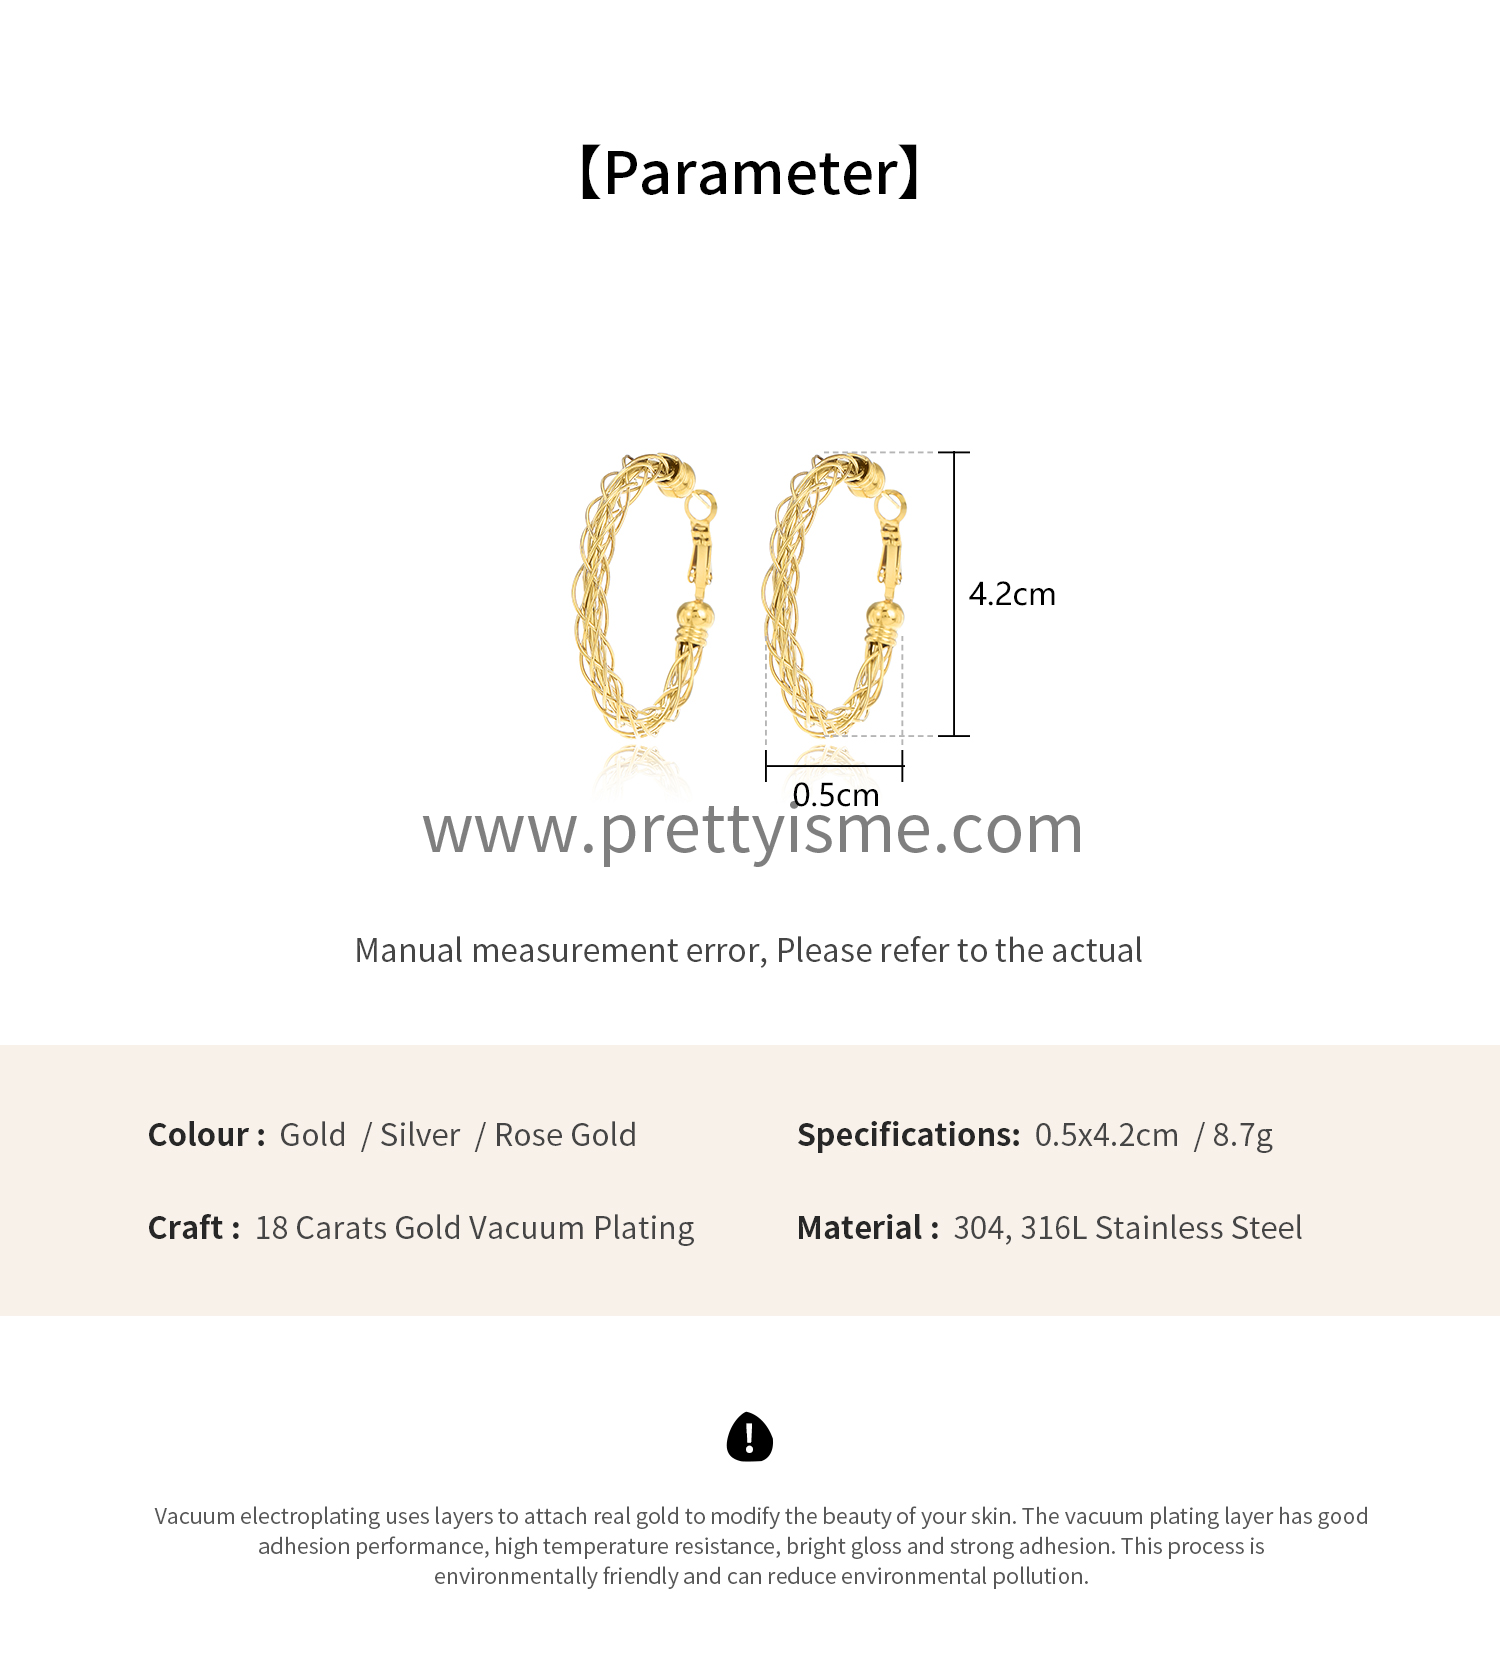 Pretty Is Me Collection Large exaggerate Wire Wrap 18K IP Gold Vacuum Plated Stainless Steel Woven Clip On Hoop Earrings Women (1).webp